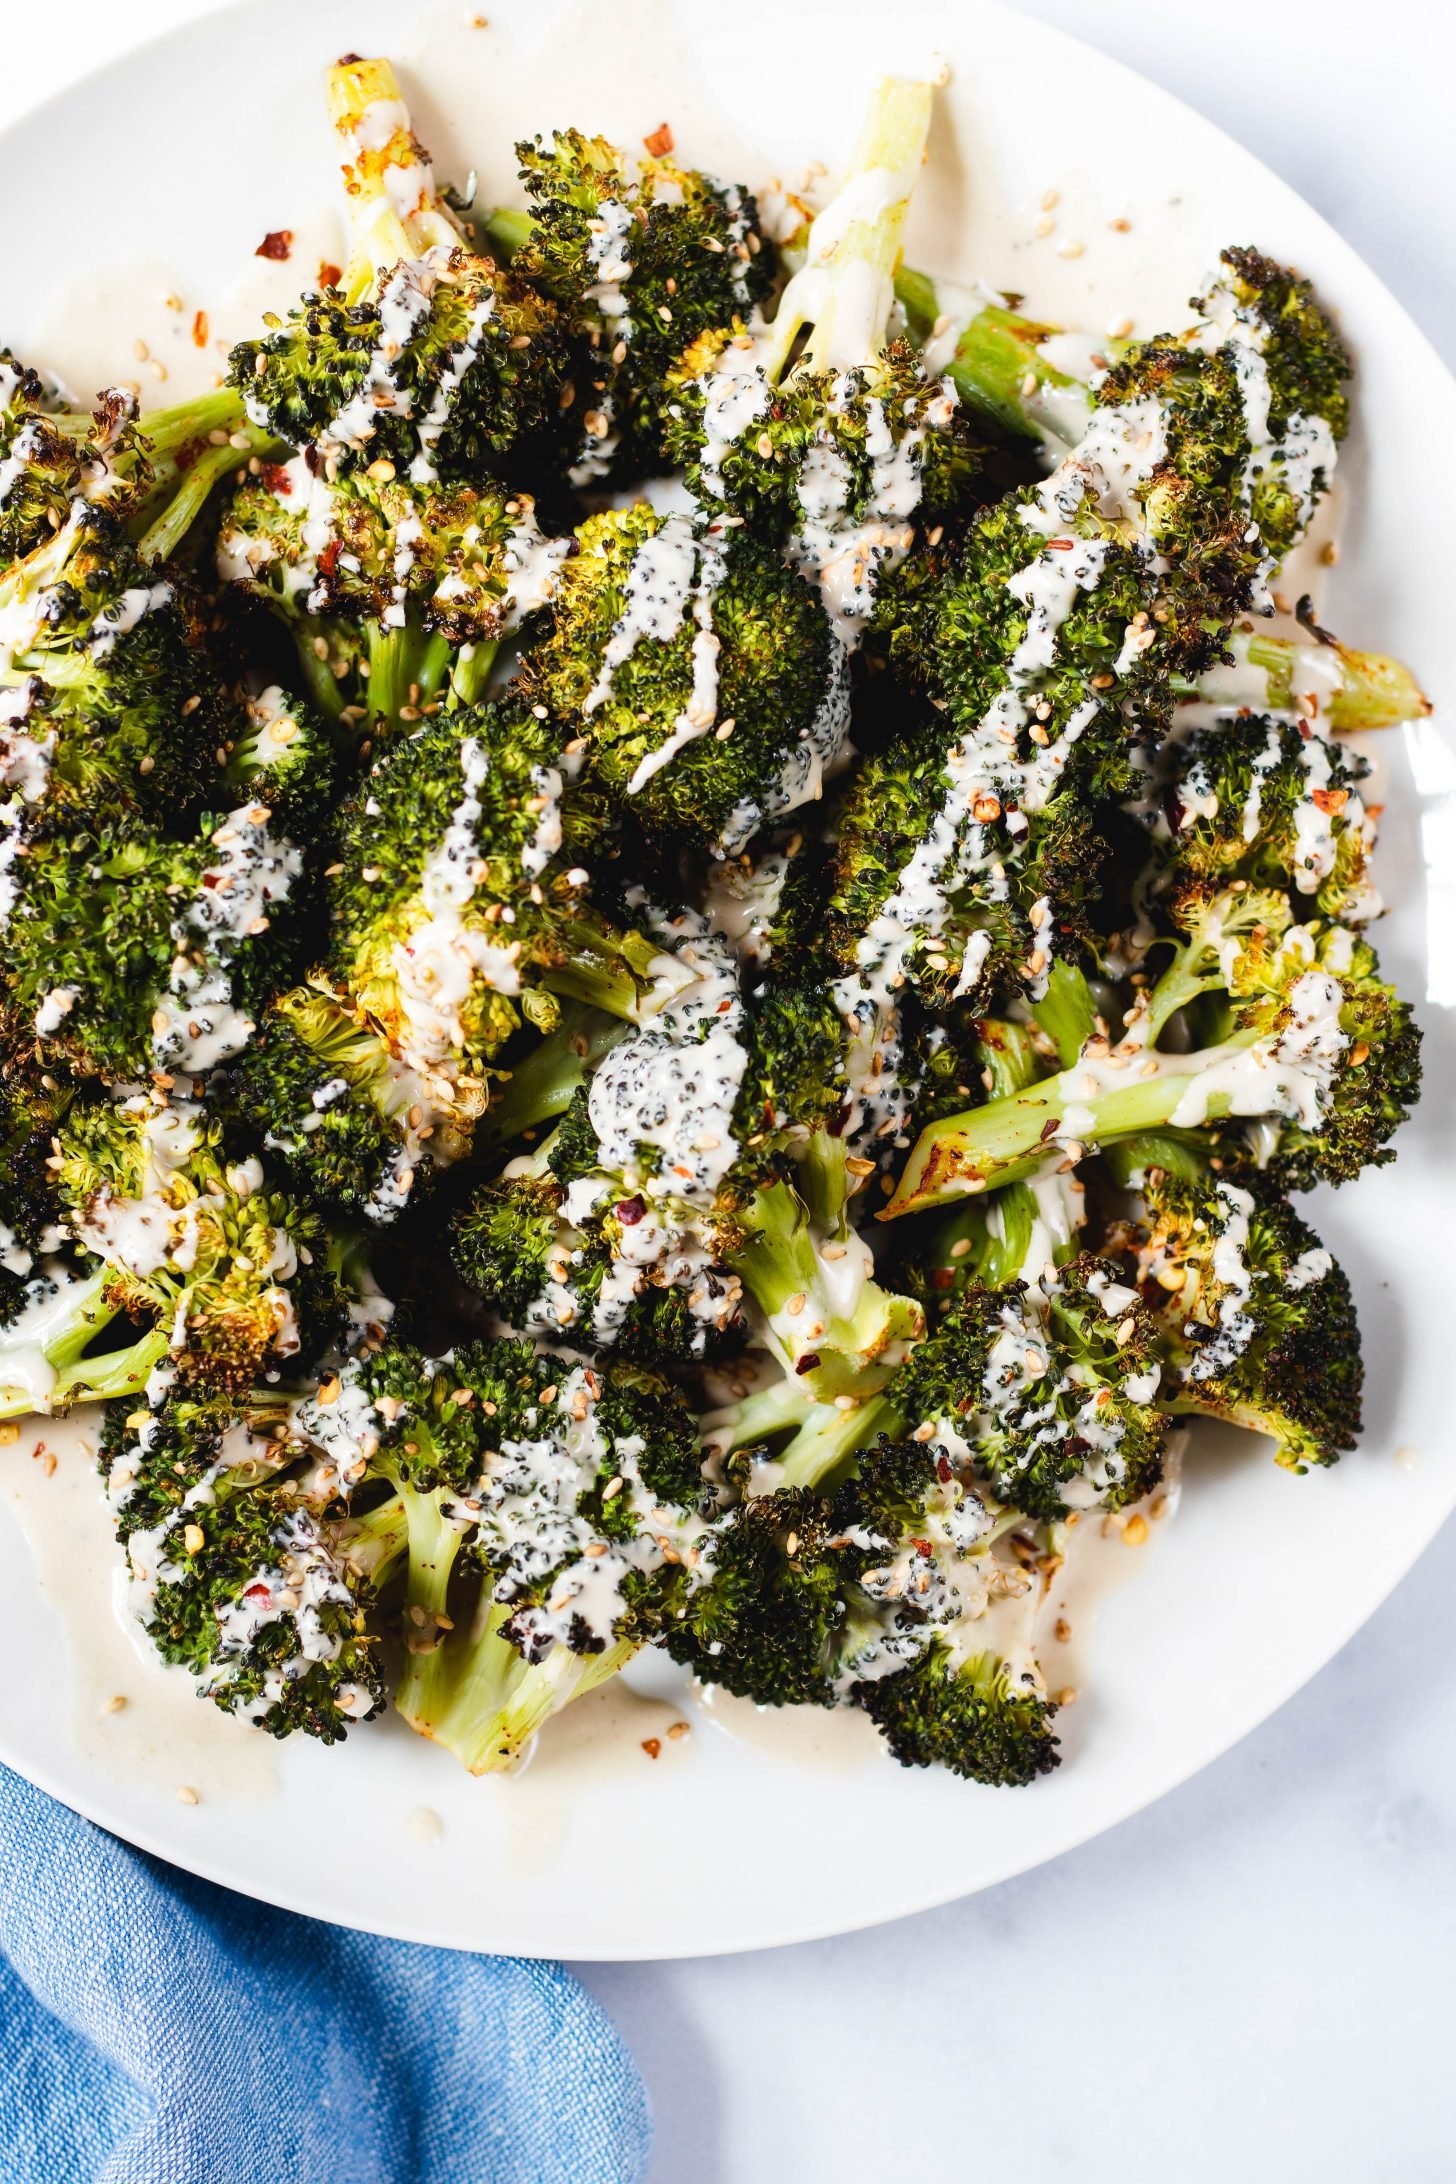 Plate of roasted broccoli drizzled with lemon tahini sauce 